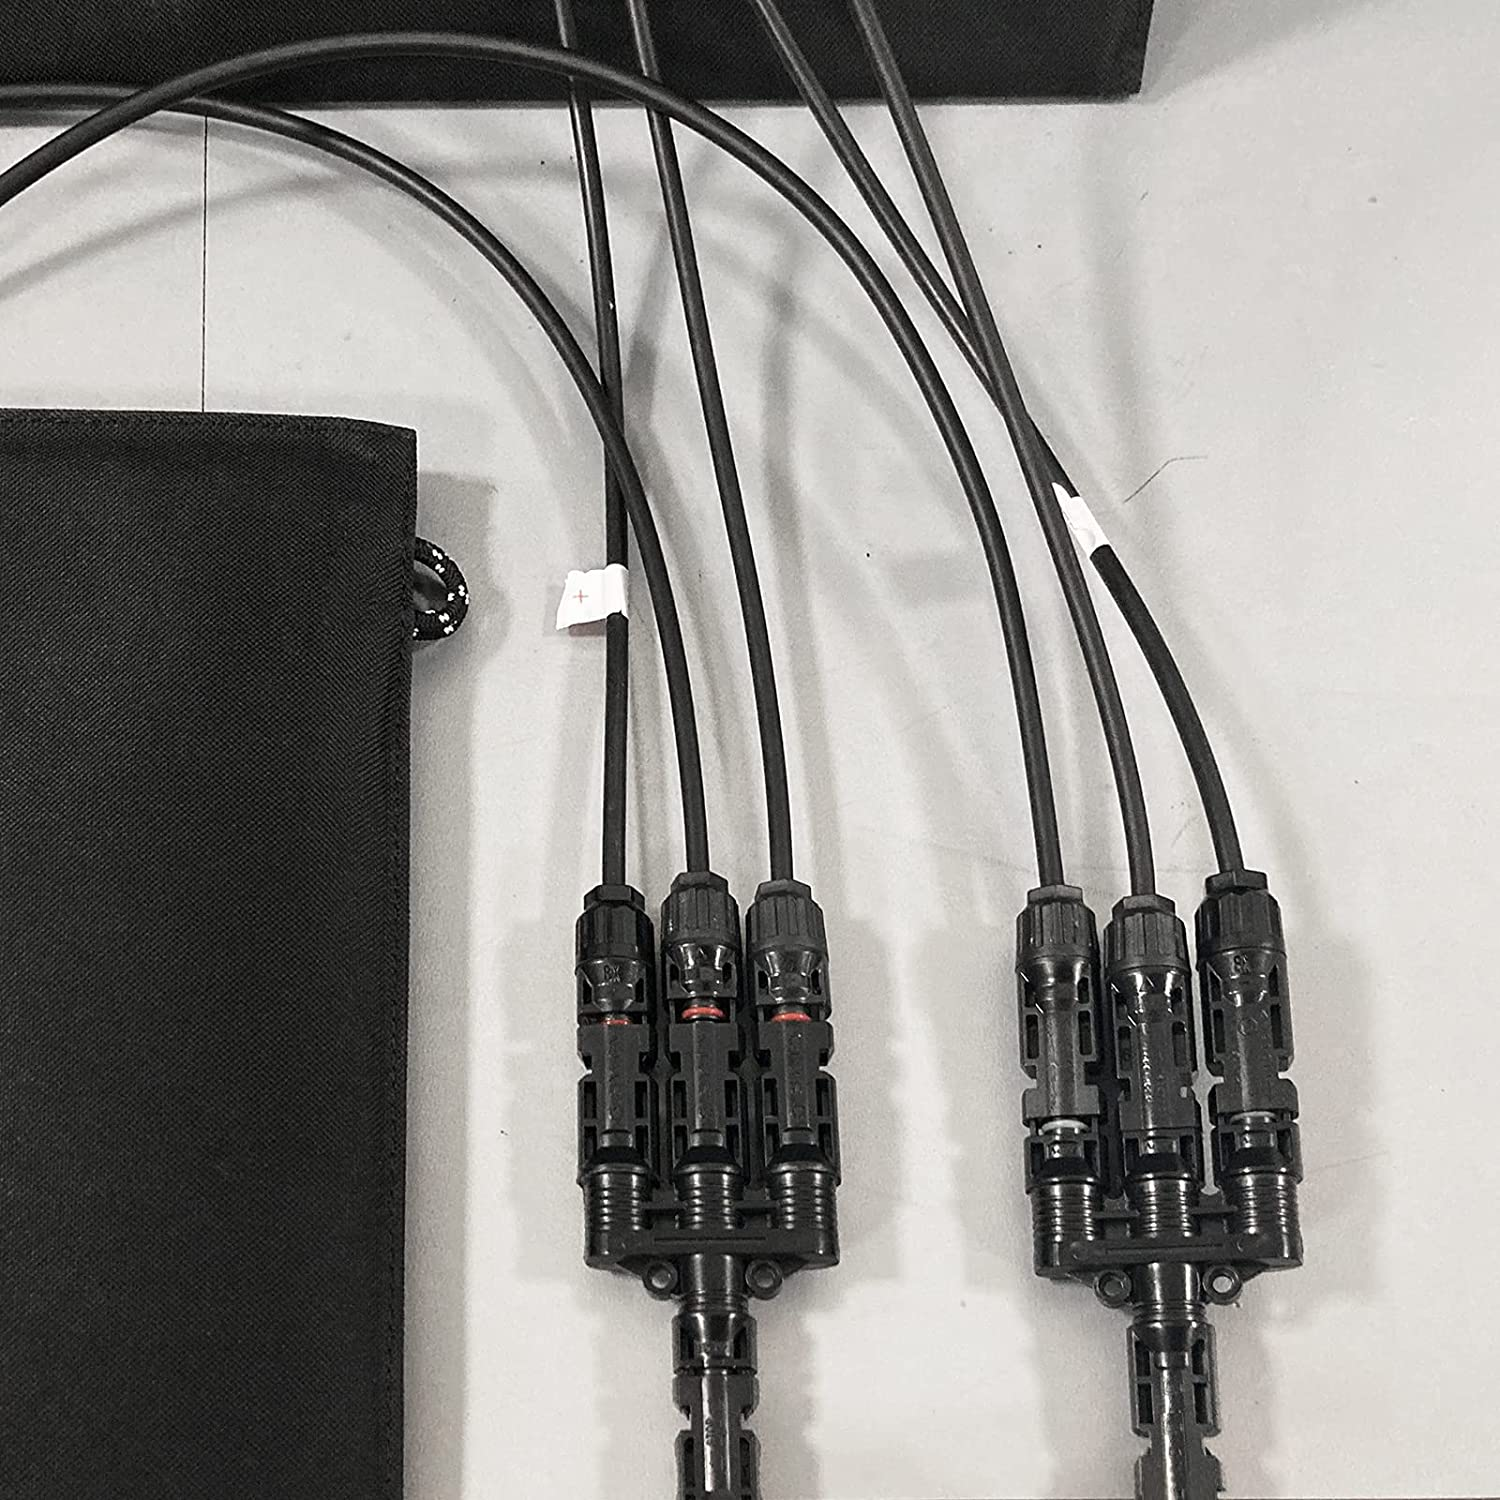 ALLPOWERS Solar T Branch Connectors for Parallel